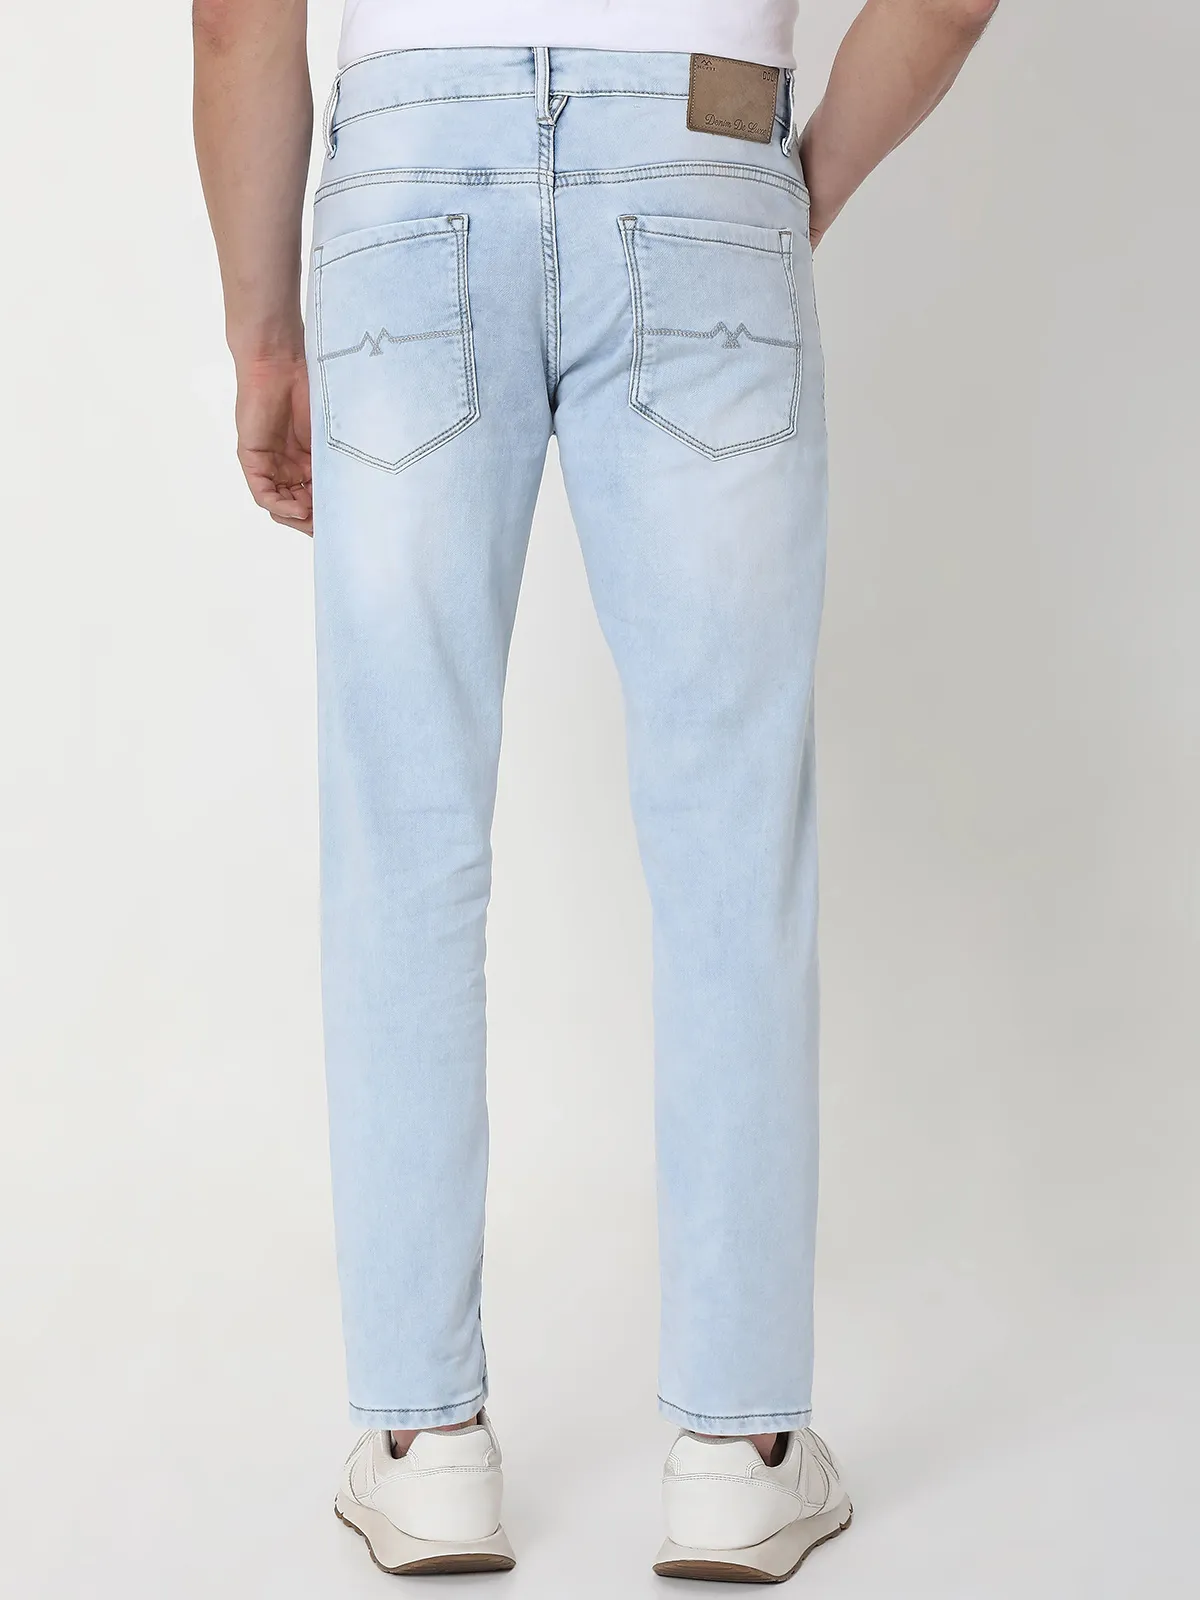 MUFTI washed sky blue ankle lenght jeans